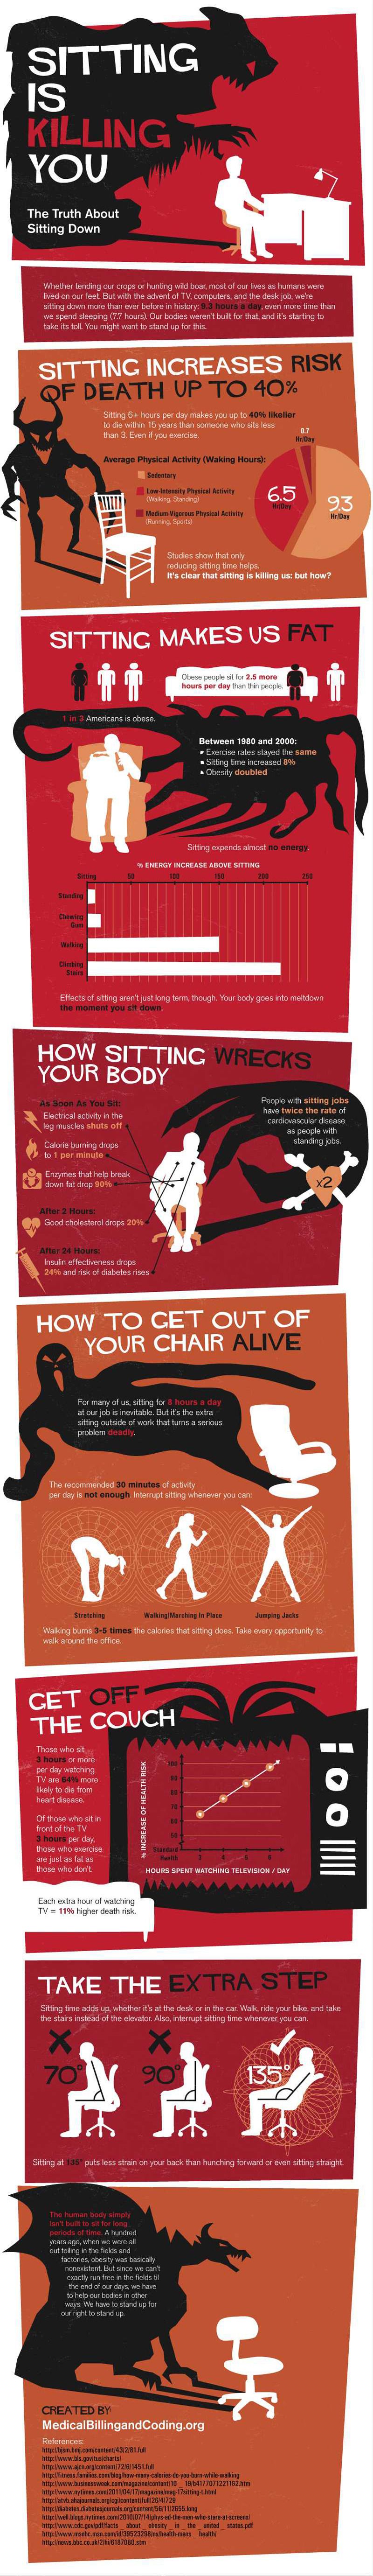 Sitting is killing you! An #infographic to promote exercise & activity